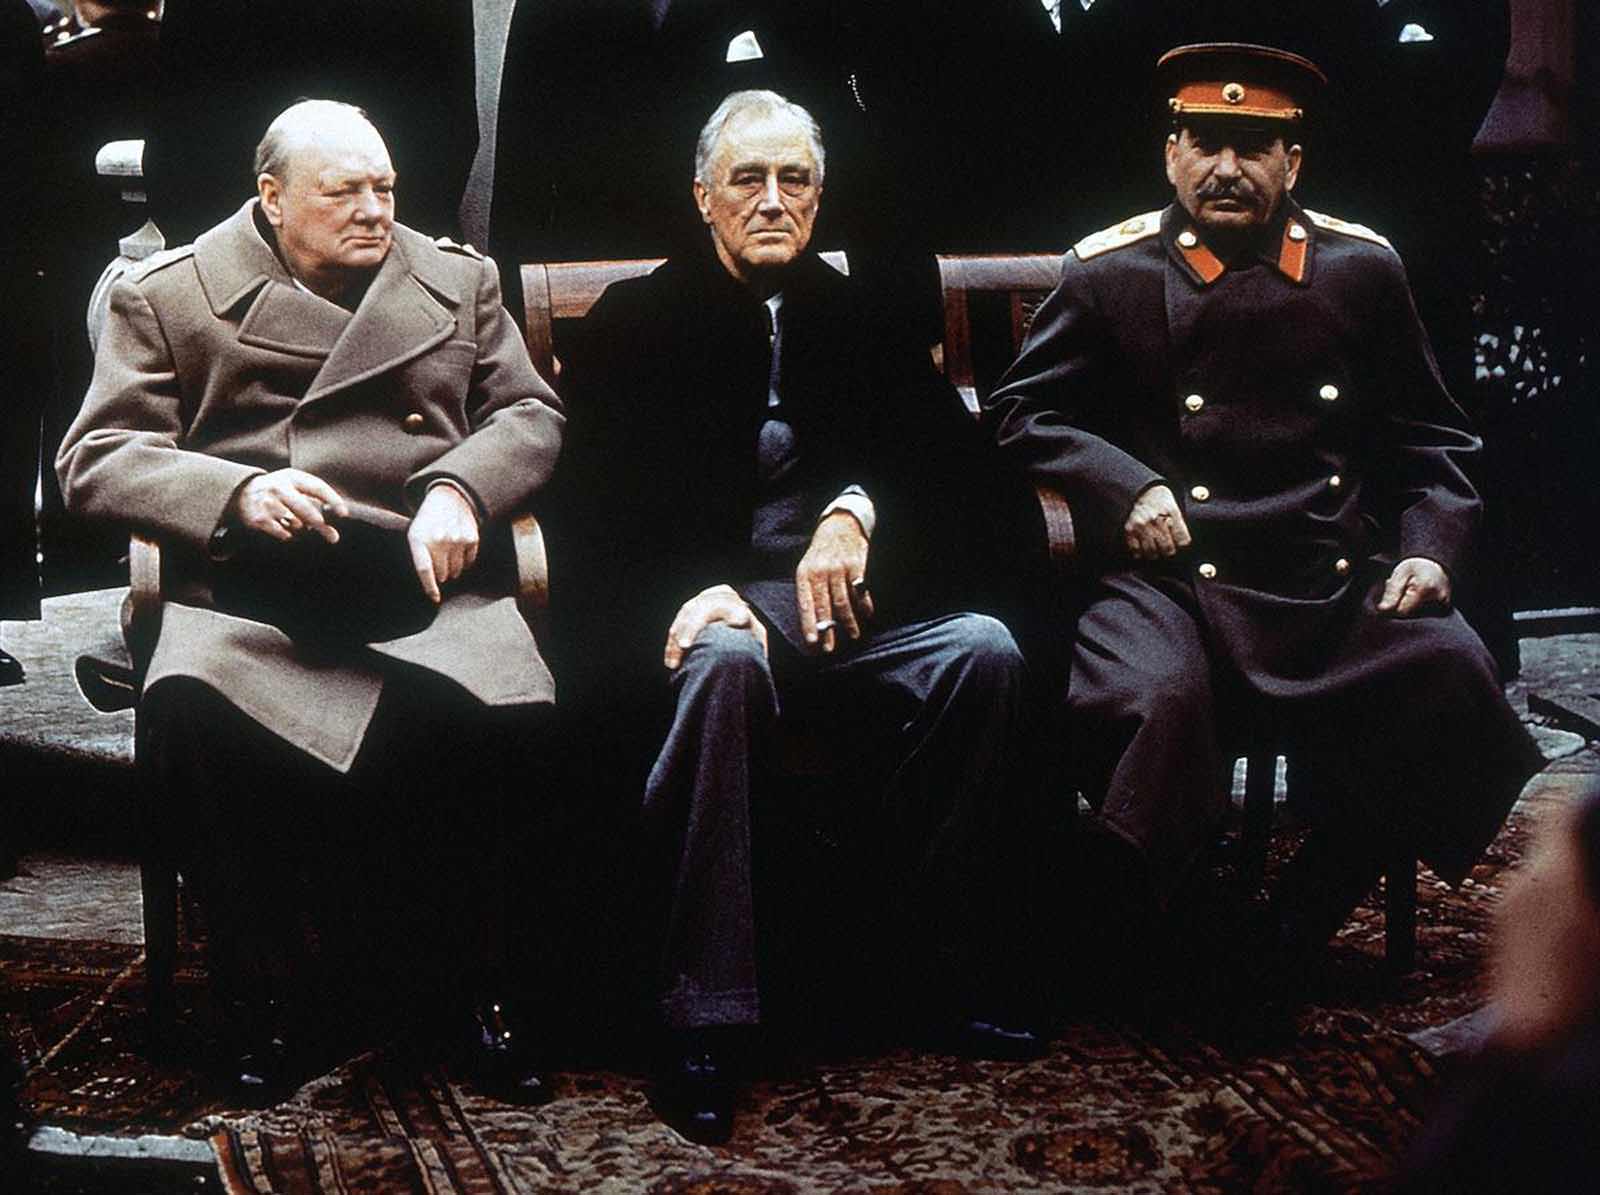 From left, British Prime Minister Winston Churchill, U.S. President Franklin Roosevelt and Soviet Premier Josef Stalin sit on the patio of Livadia Palace, Yalta, Crimea, in this February 4, 1945 photo. The three leaders were meeting to discuss the post-war reorganization of Europe, and the fate of post-war Germany.